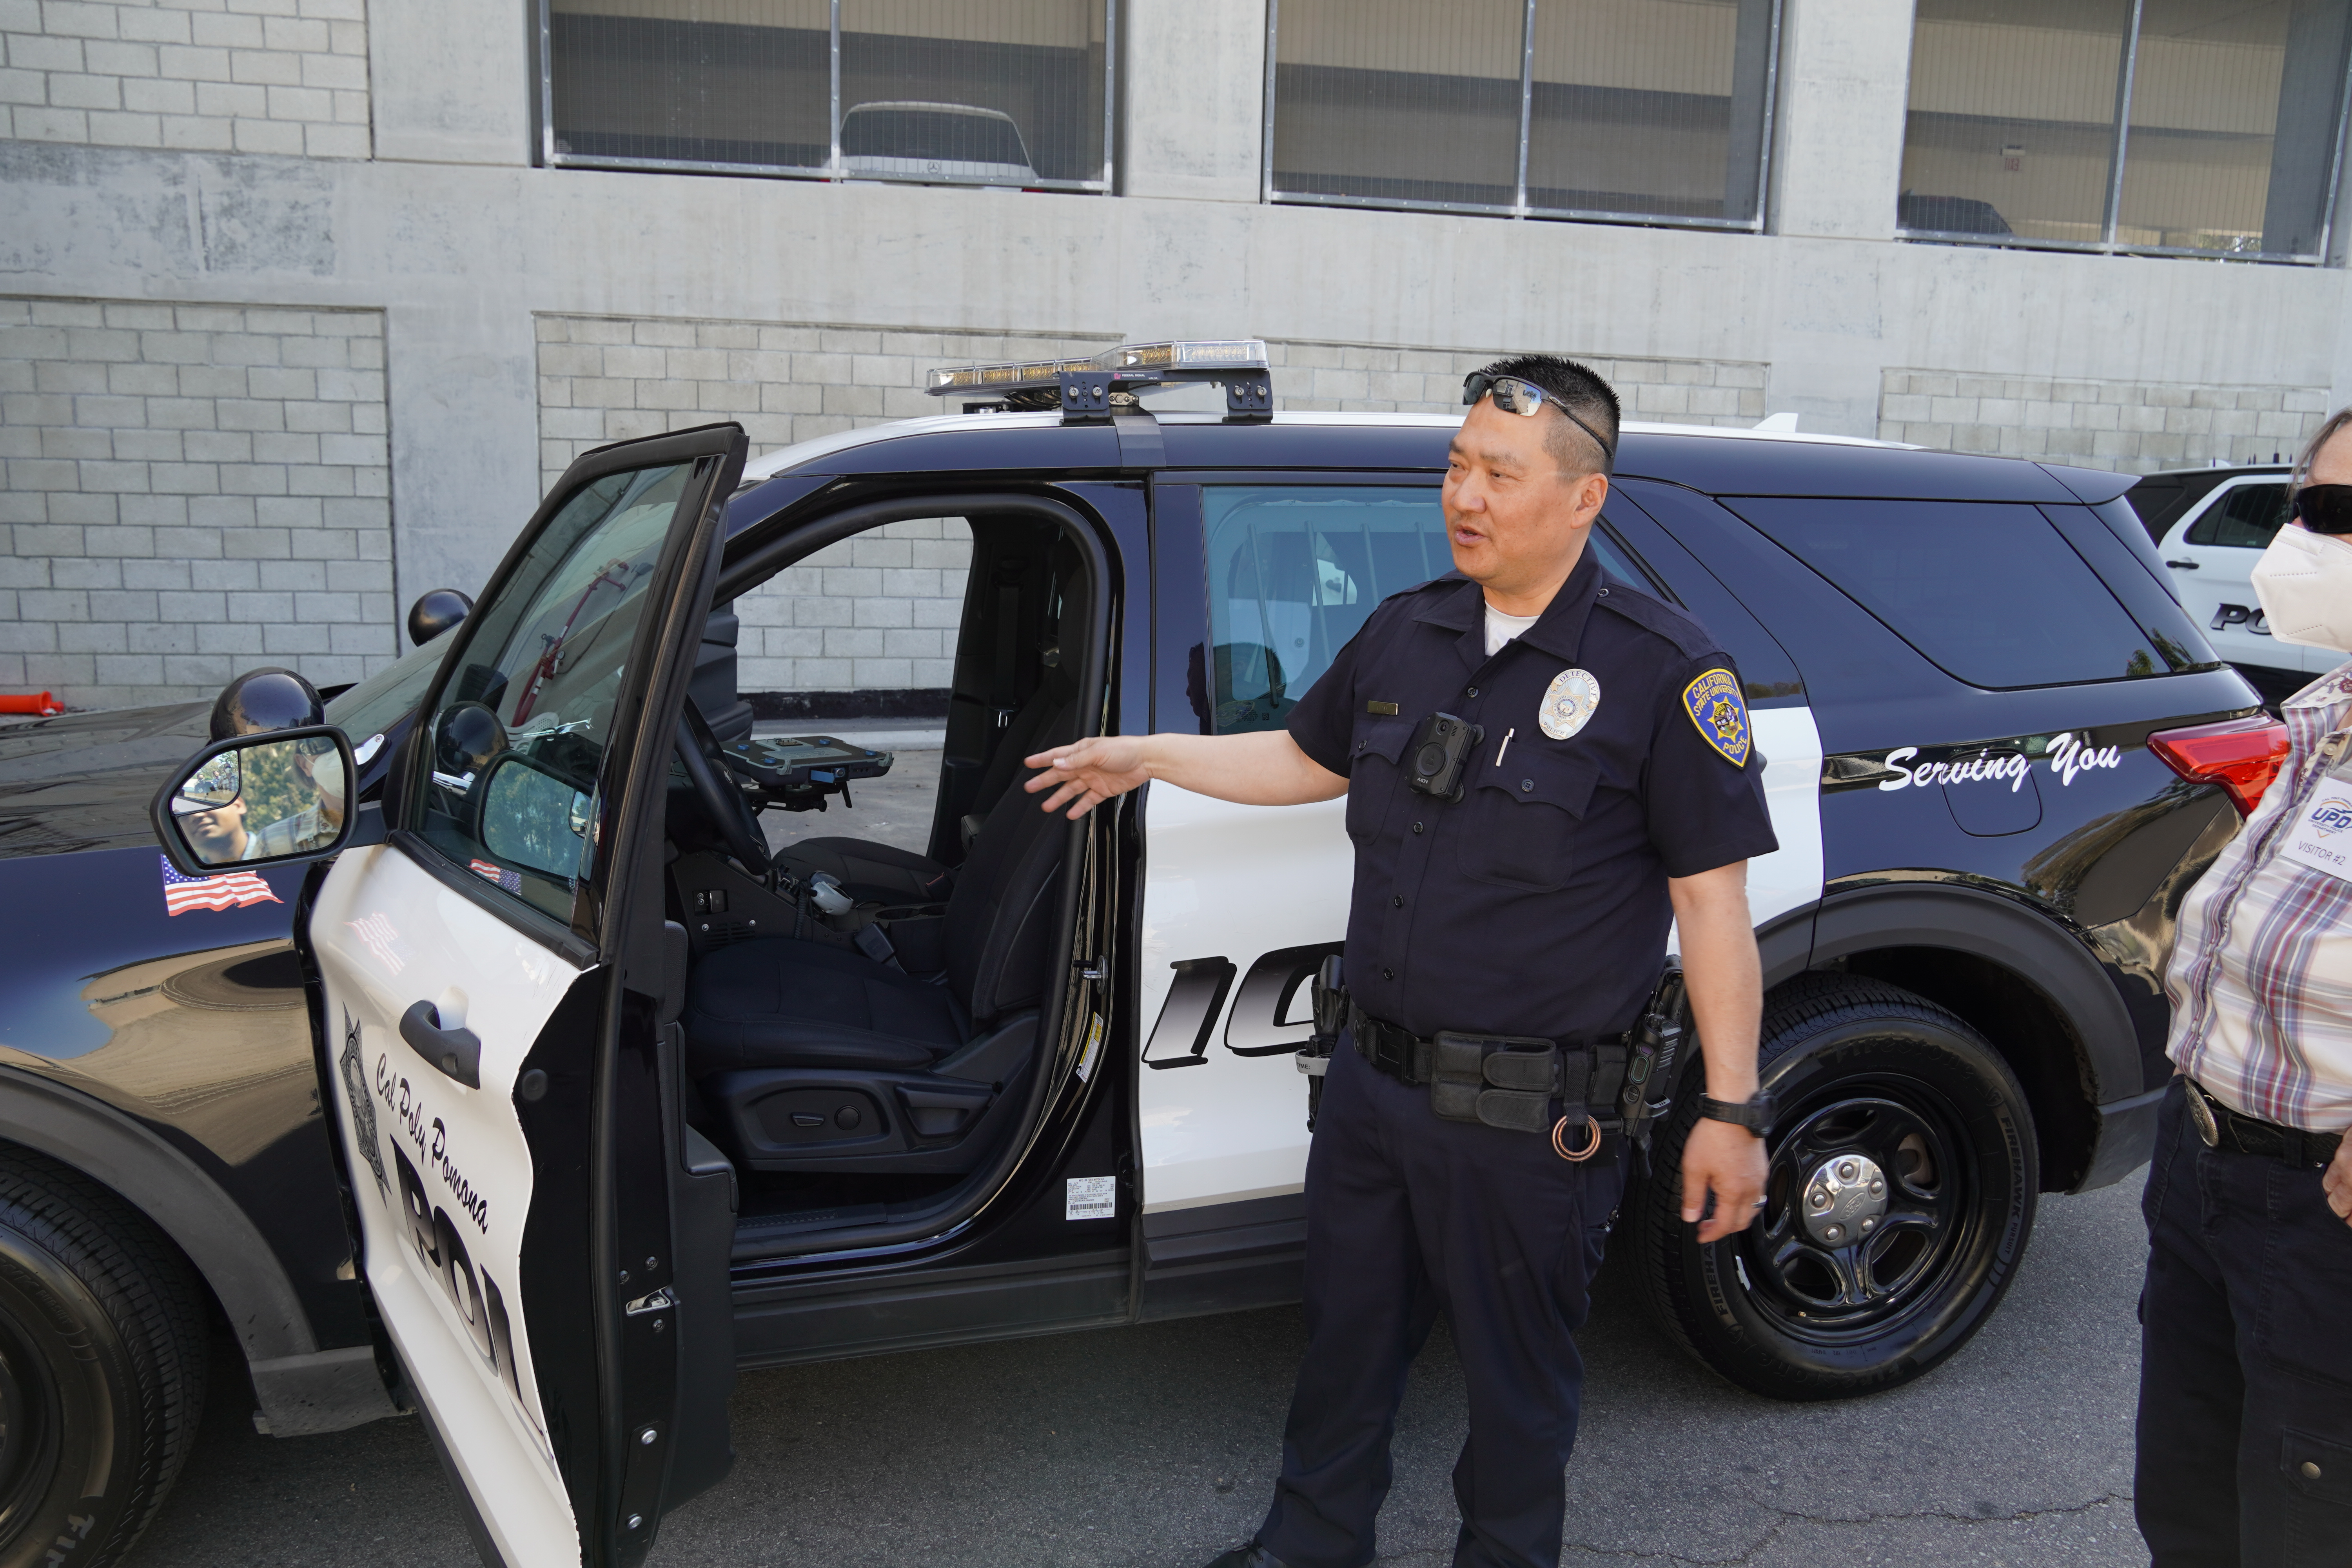 A UPD officer demonstrates features of the police vehicle